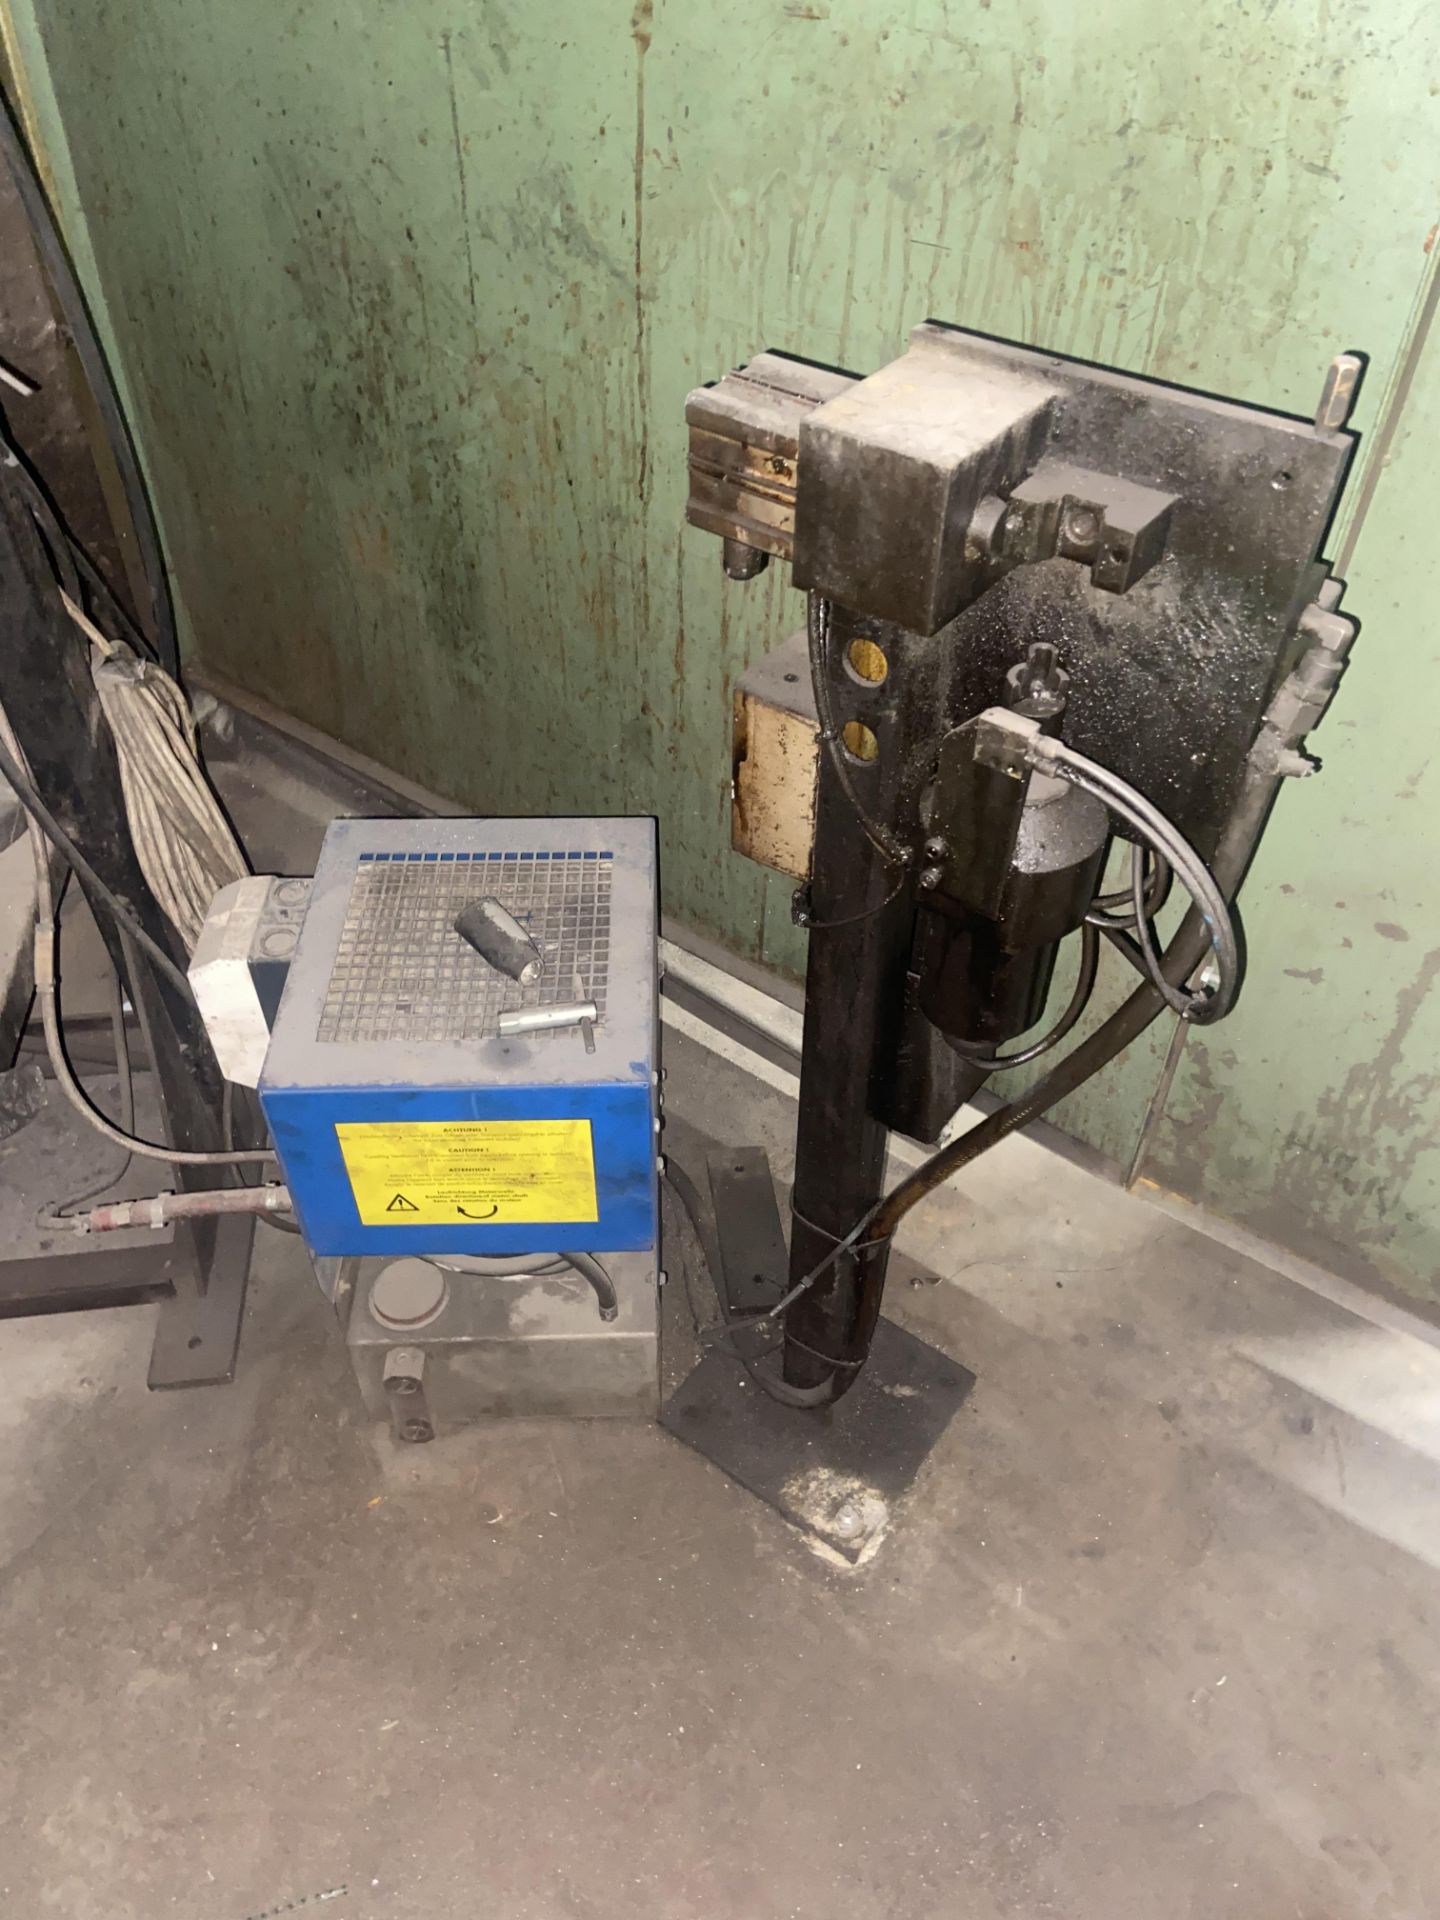 ROBOT WELDING CELL, with ABB Esab welding robot, Esab A351 unit, with stand, chiller, cleaning unit, - Image 8 of 10